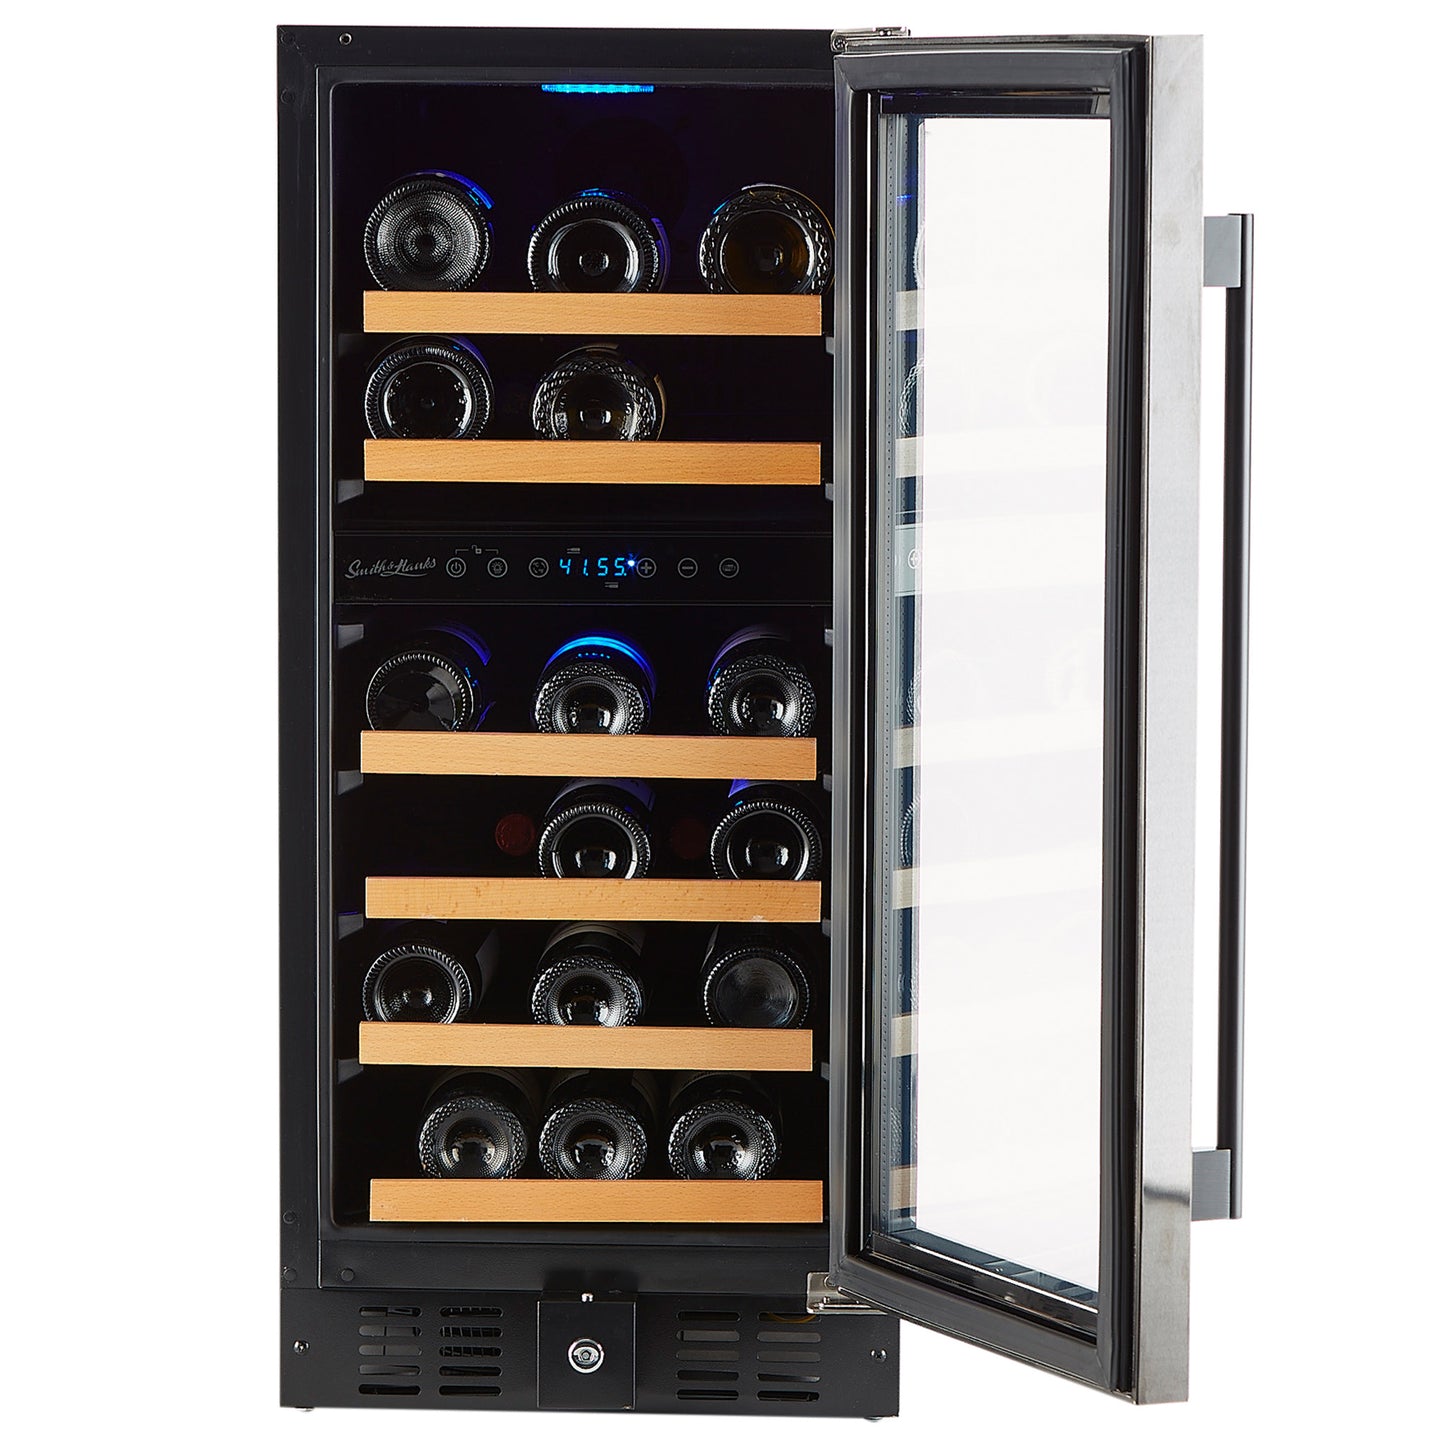 Buy a Smith & Hanks 32 Bottle Dual Zone Black Stainless Wine Cooler by Chilled Beverages